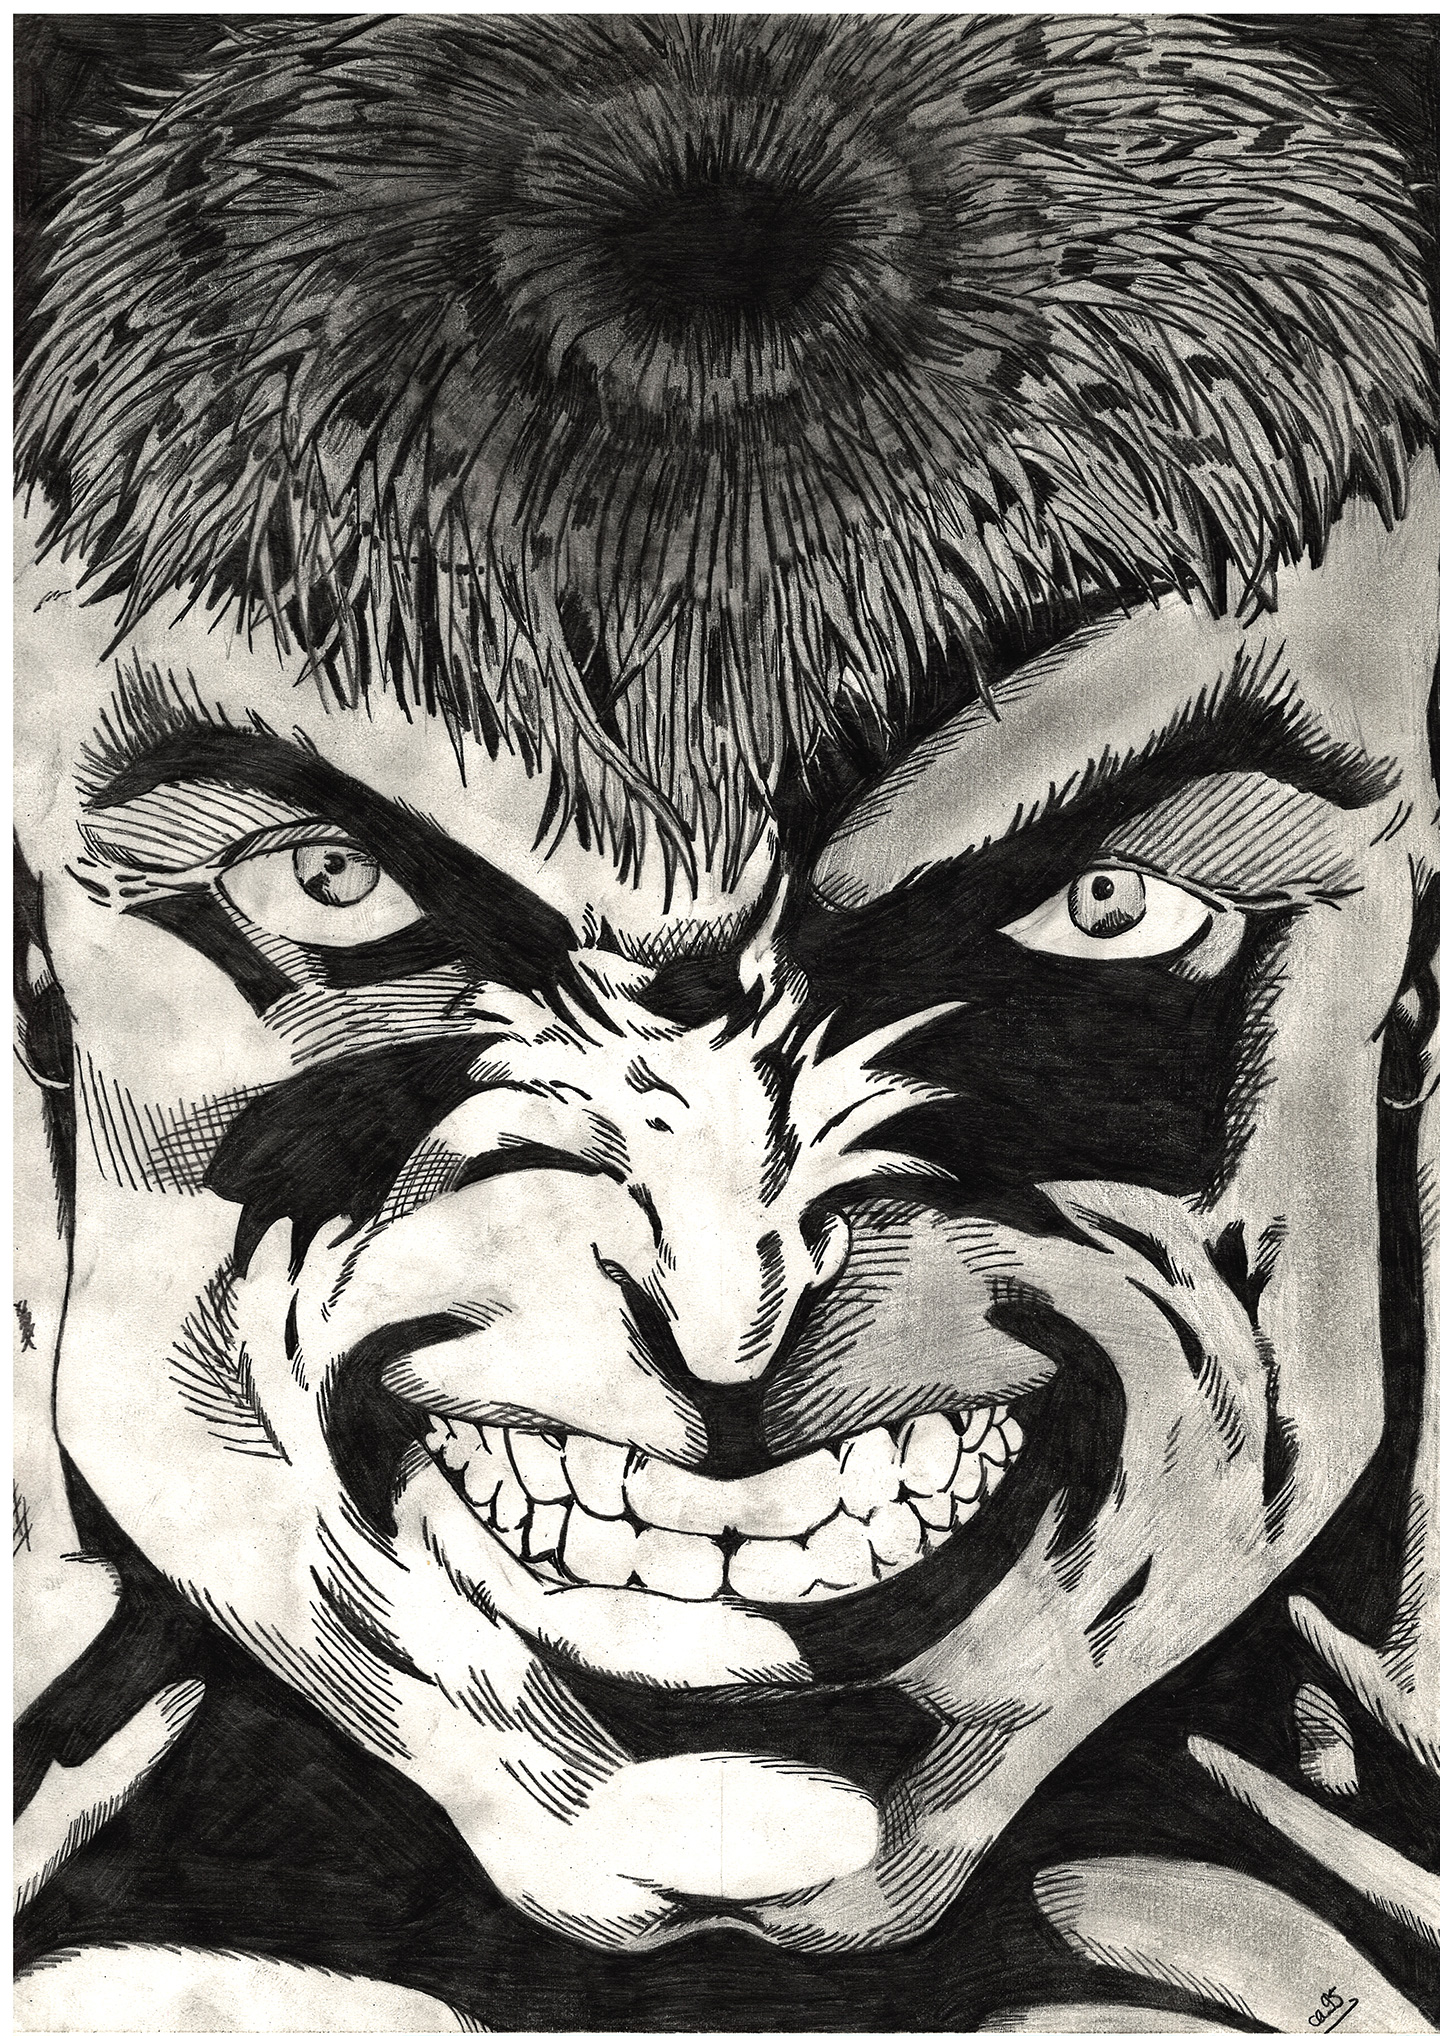 A black and white drawing of The Hulk’s head from Marvel Comics